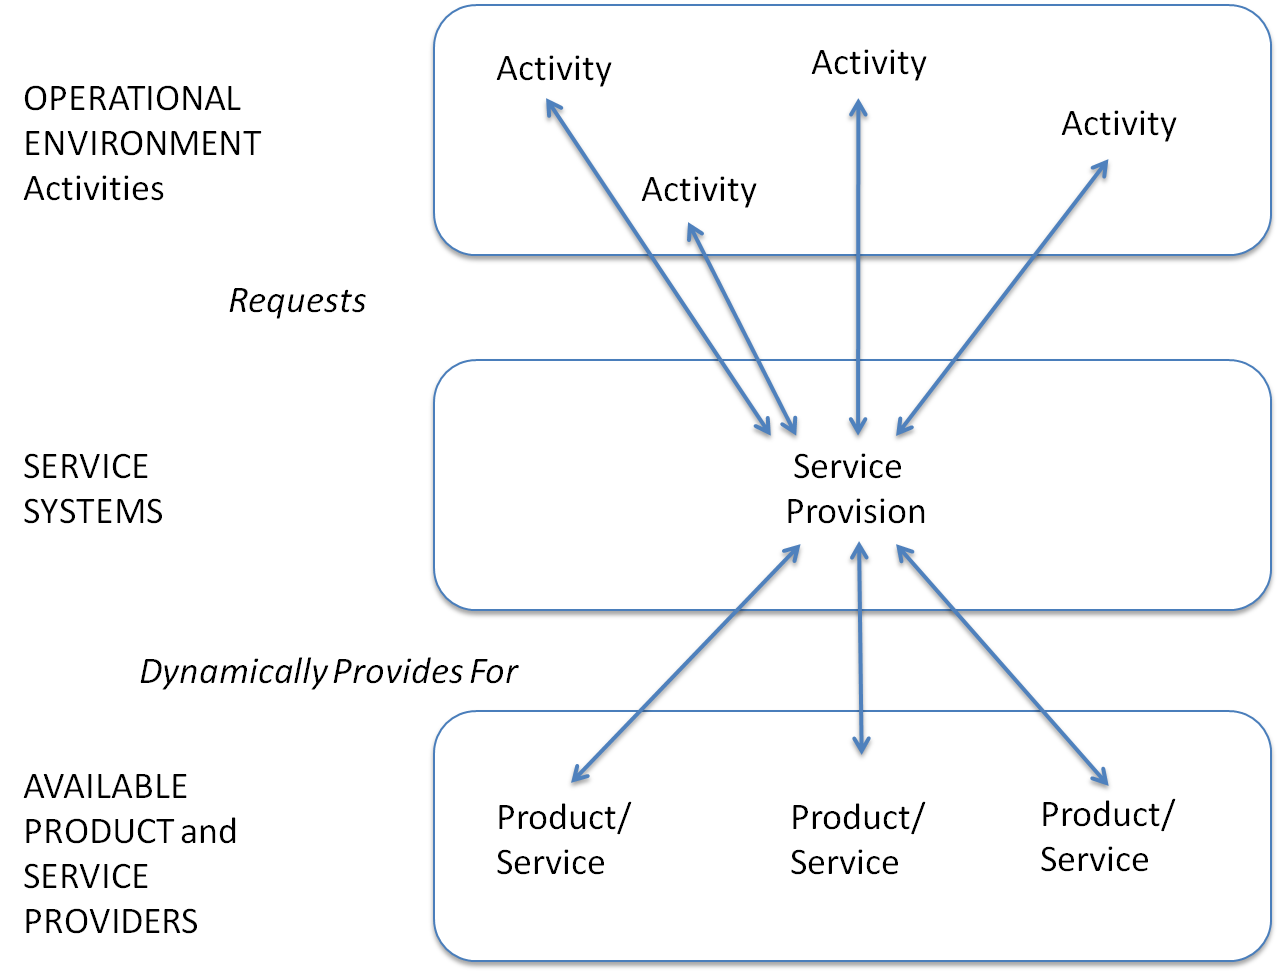 Service System Provisioning